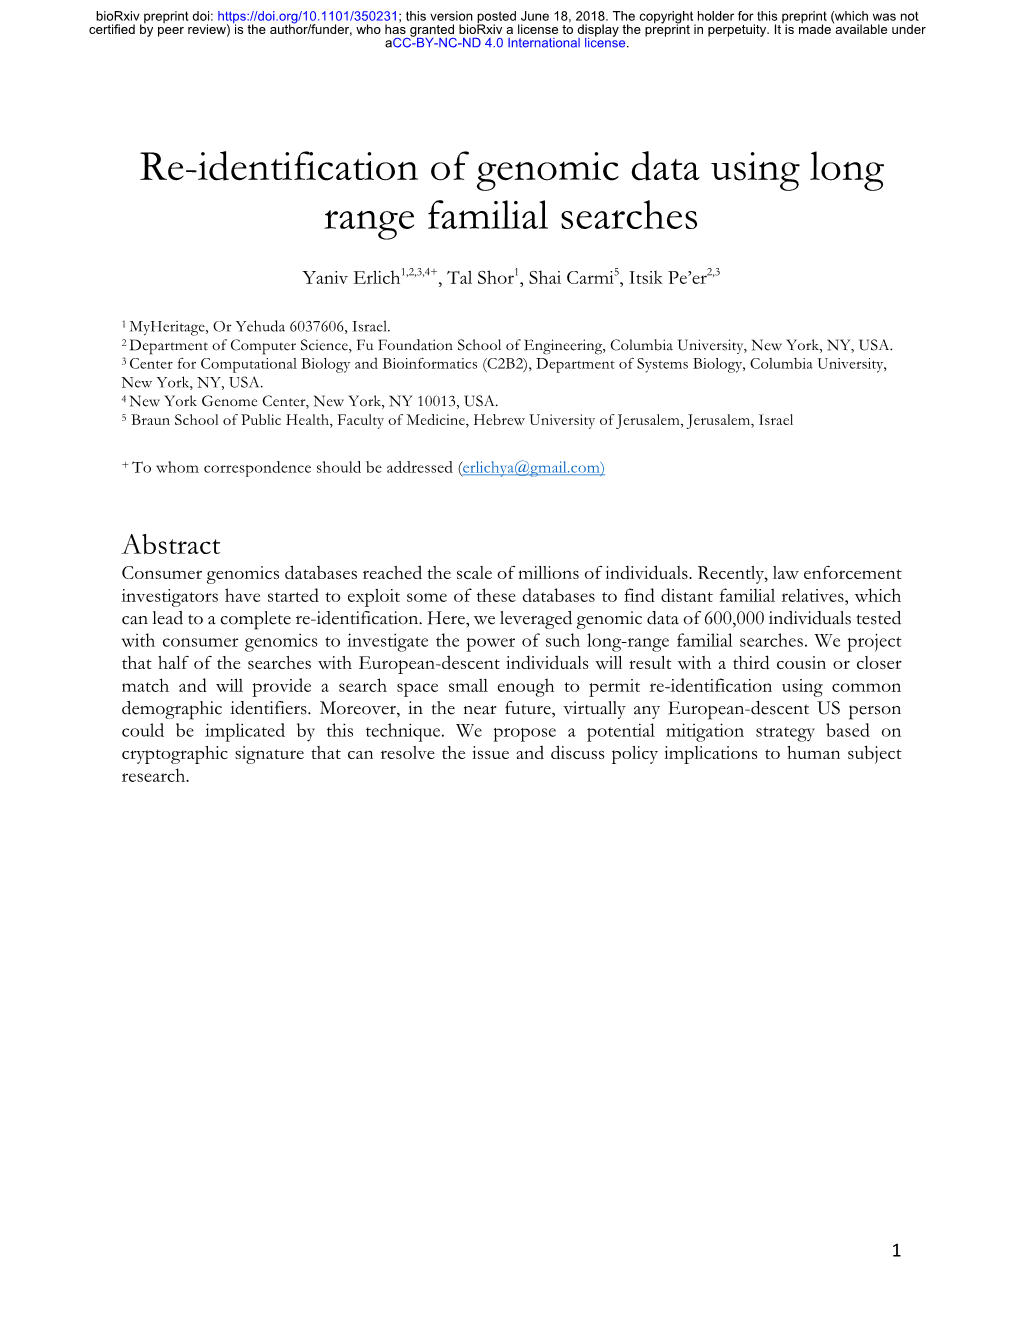 Re-Identification of Genomic Data Using Long Range Familial Searches